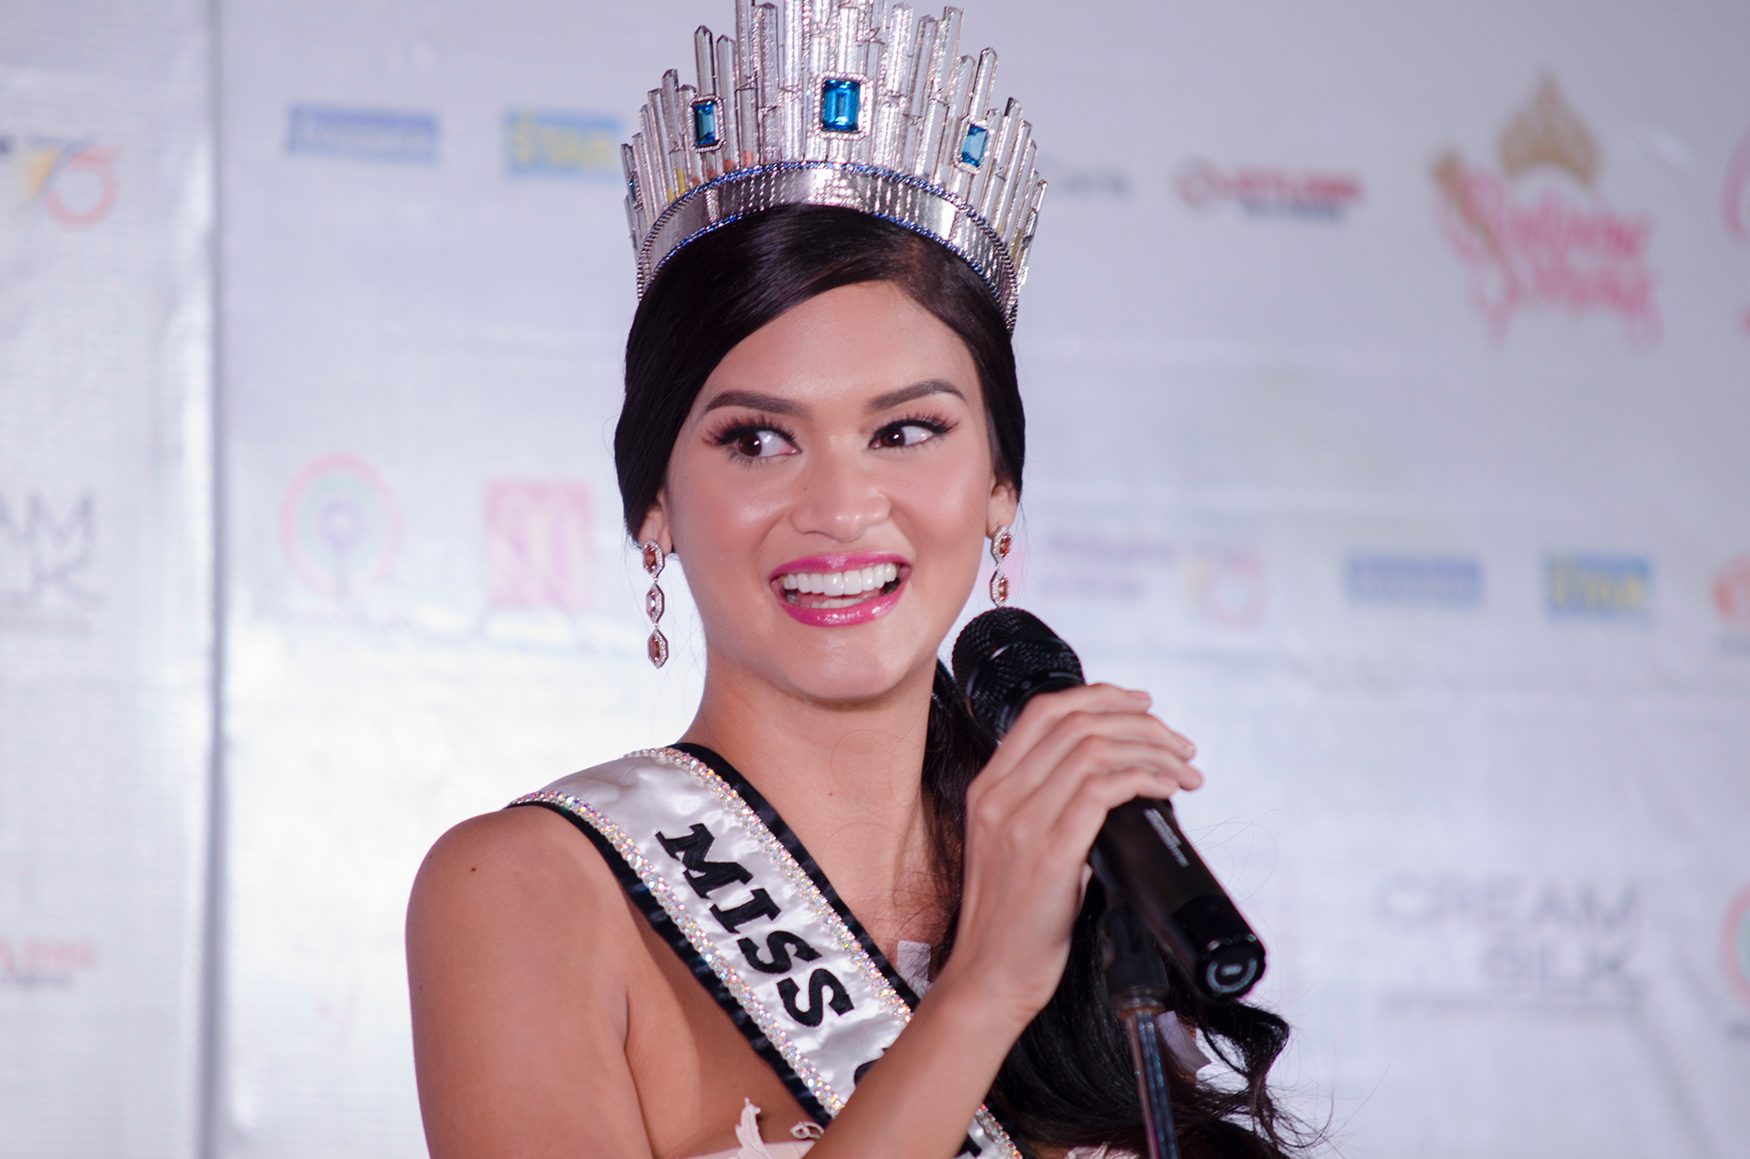 10 things we learned from Pia Wurtzbach’s fun Twitter interview